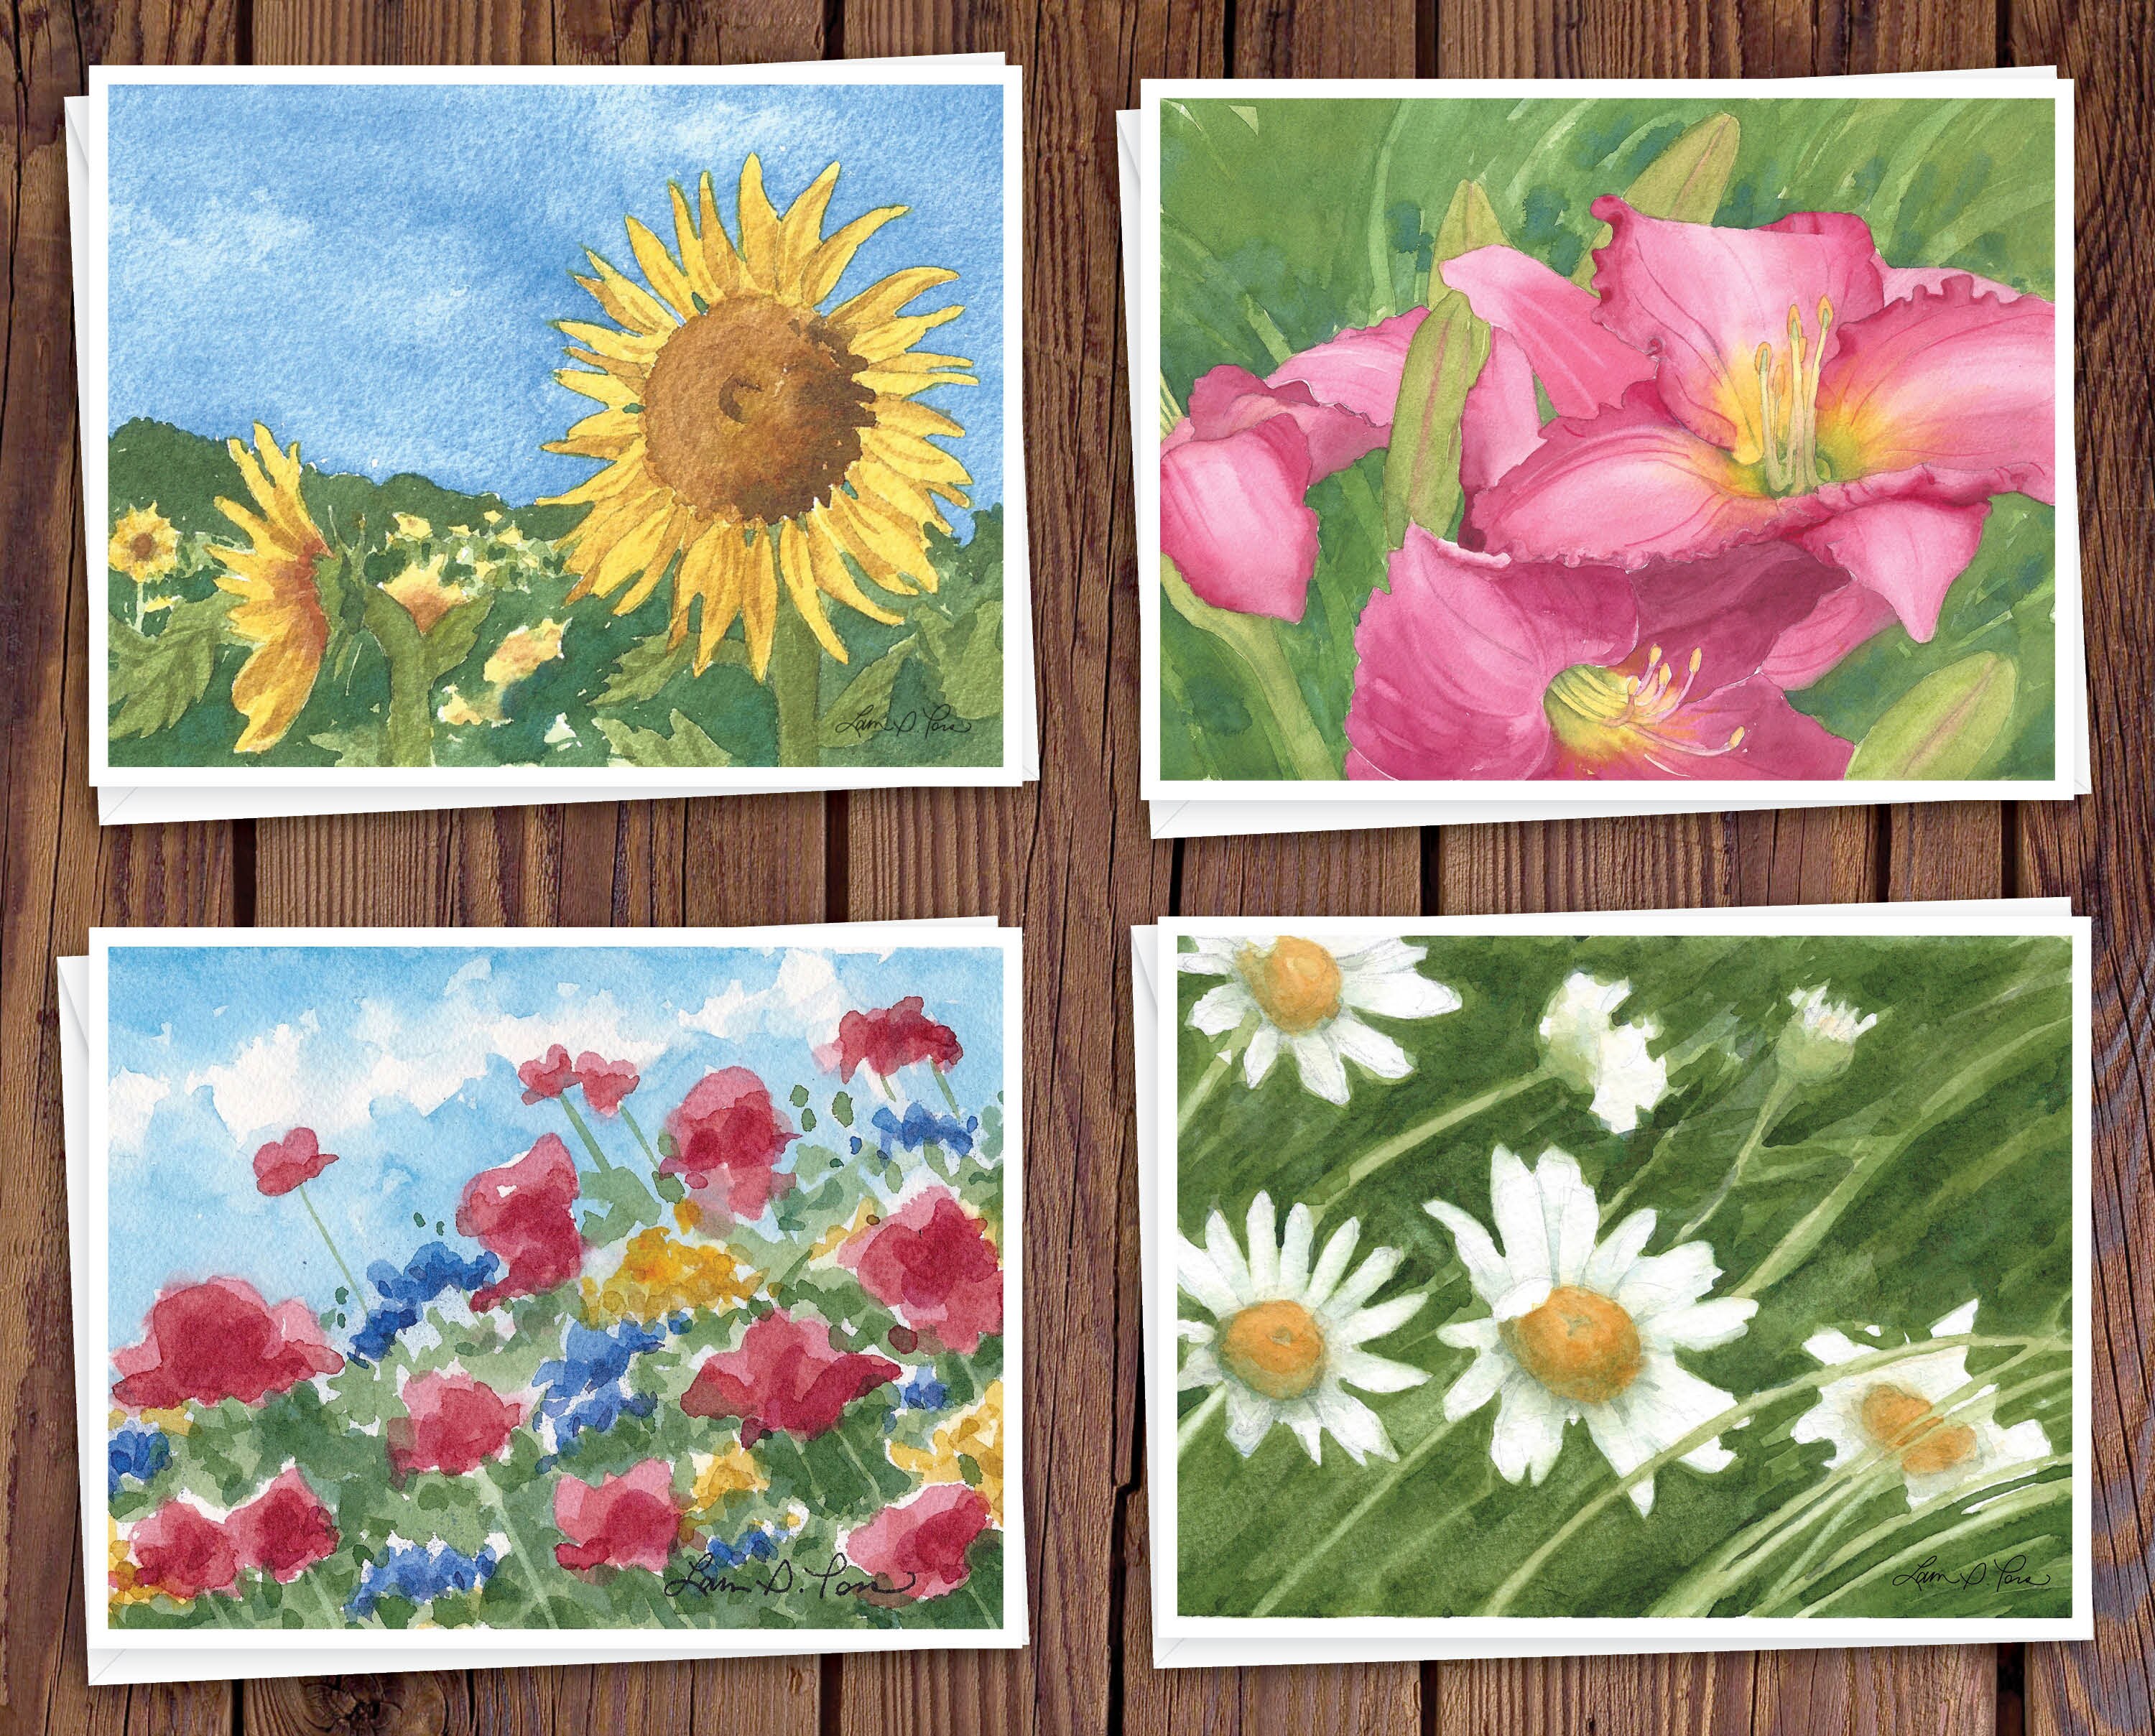 8 Watercolor Note Cards With Envelopes, Featuring a Daisy Watercolor  Painting by Laura Poss, Blank Inside // Handmade Cards 